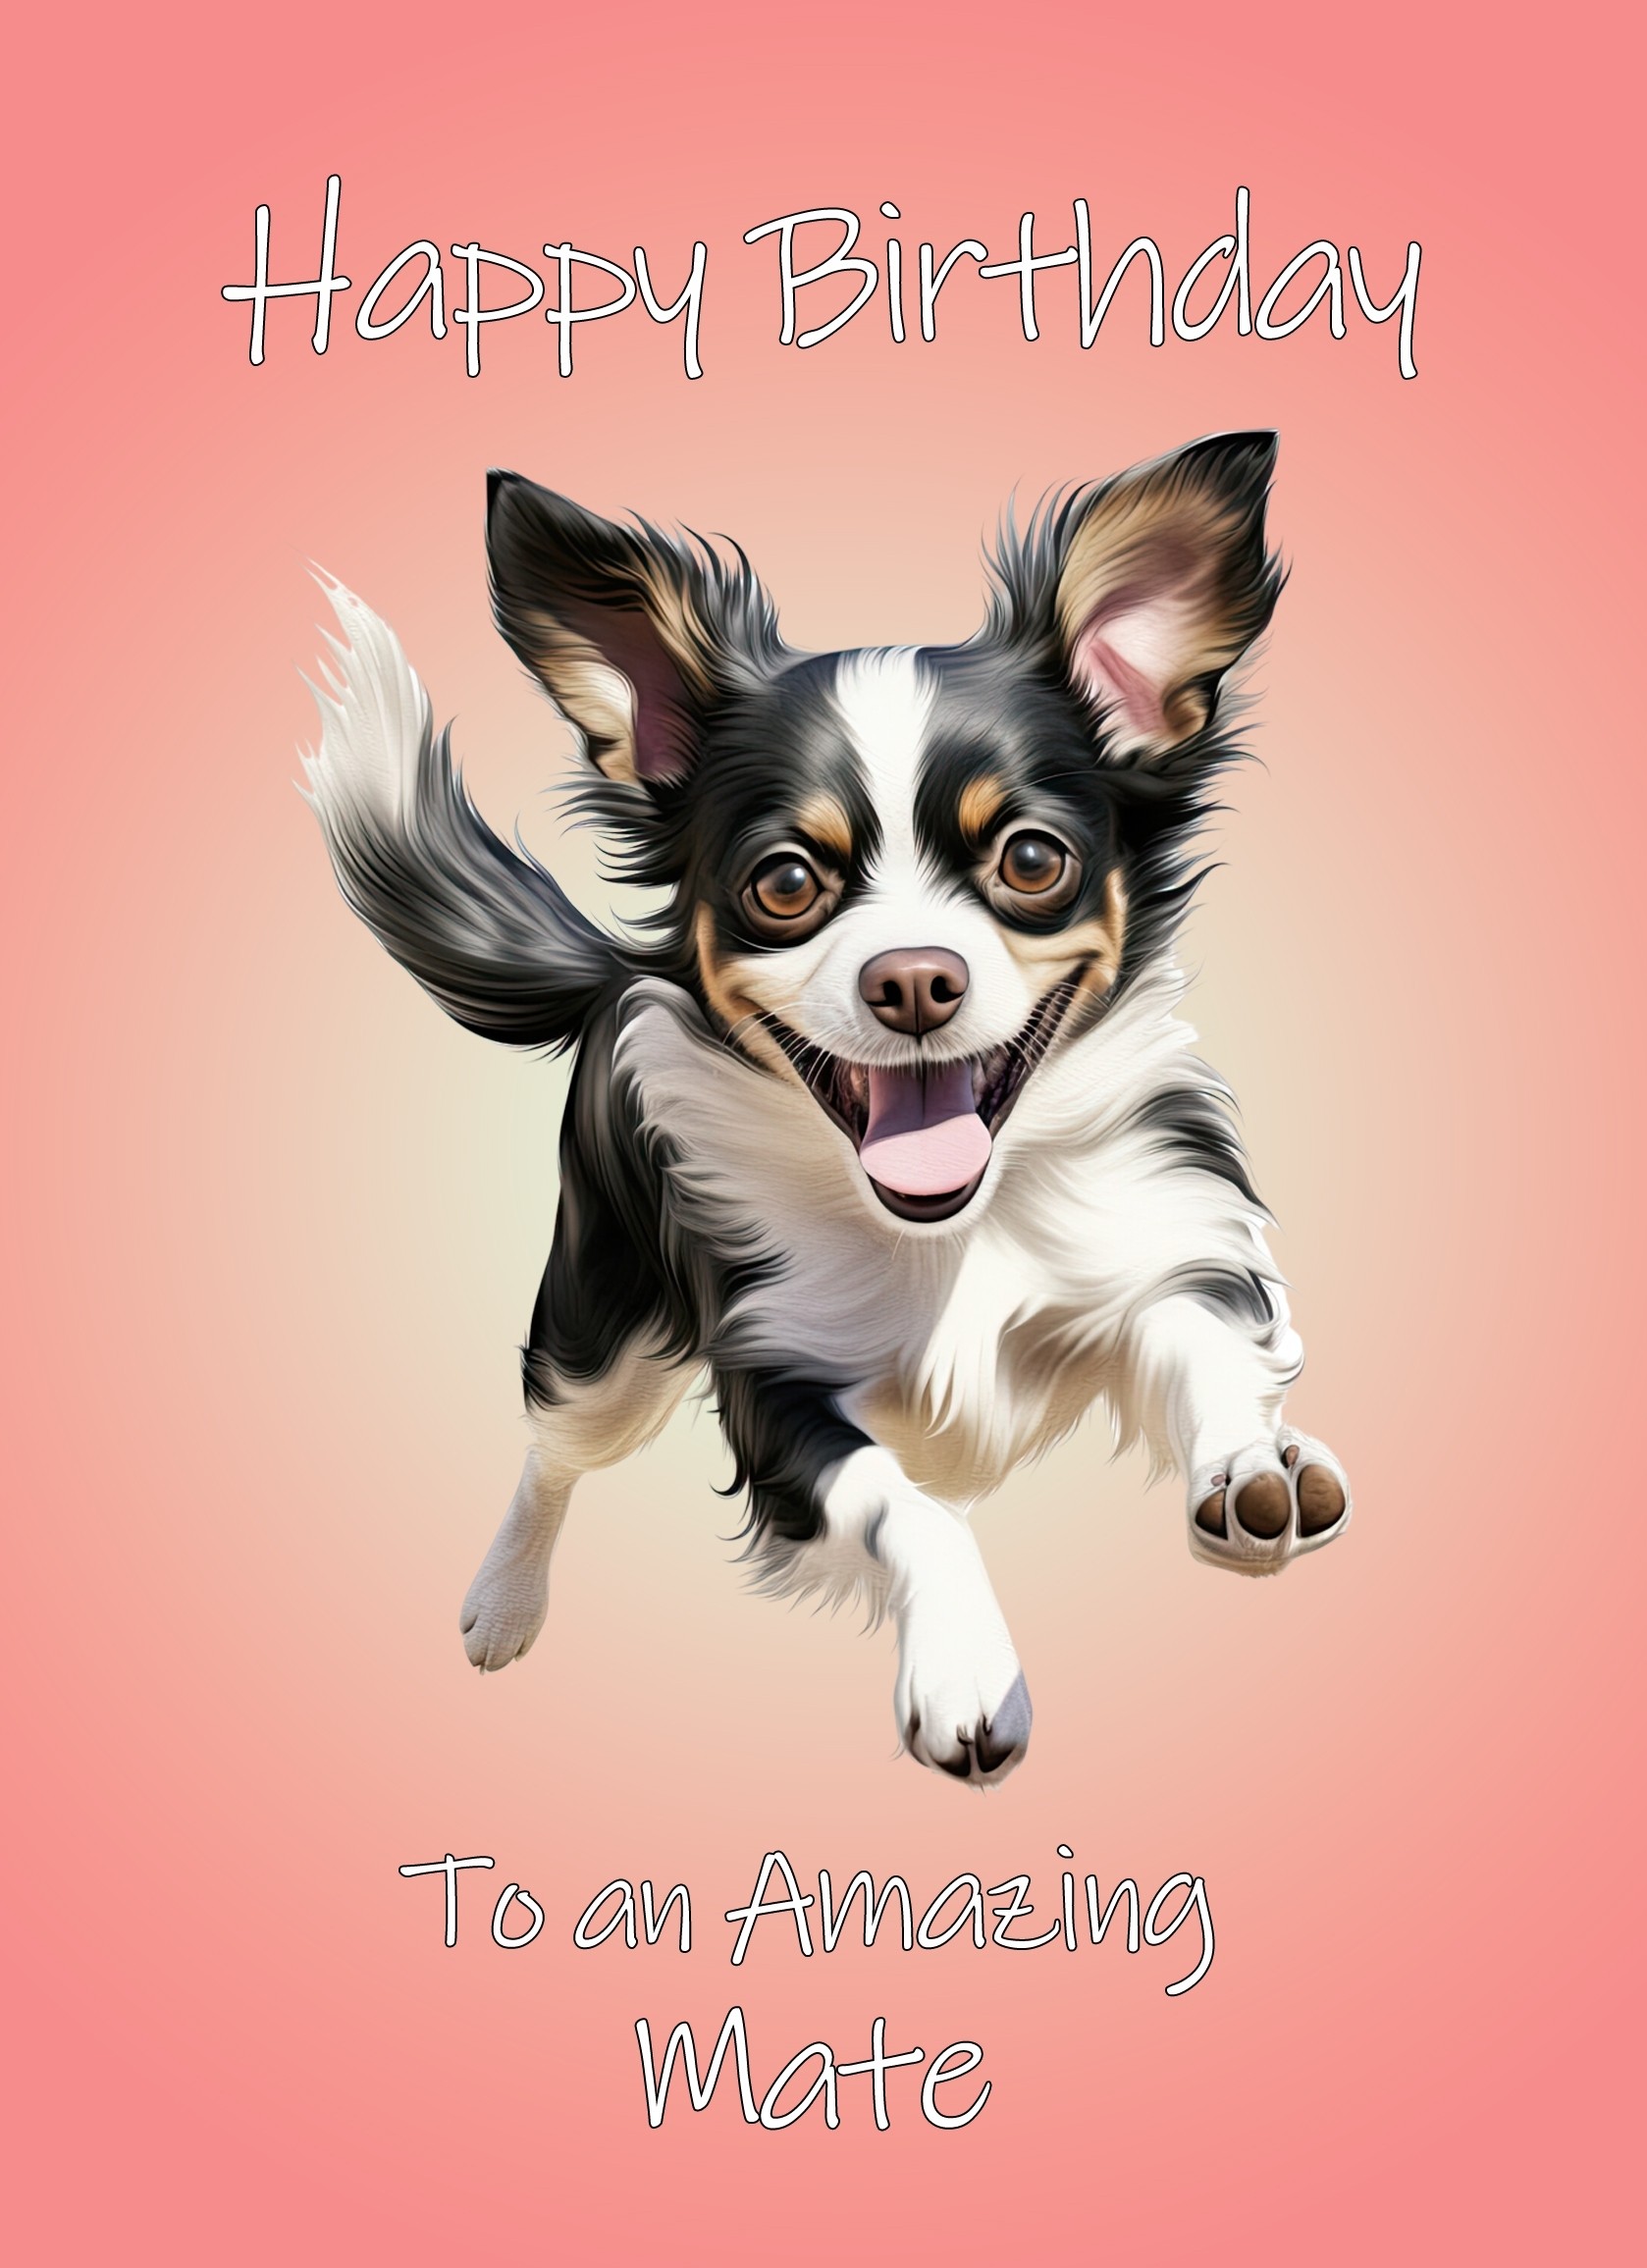 Chihuahua Dog Birthday Card For Mate